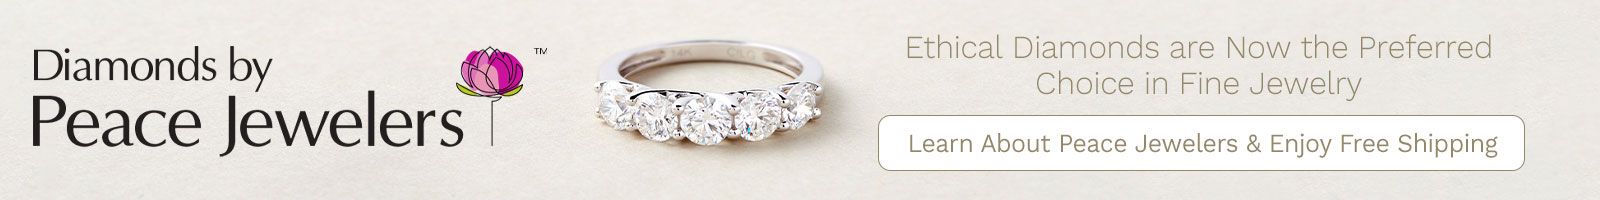 Peace Jewelers |  210-223 Peace Jewelers 14K Gold Choice of Carat Weight Cultured Diamond Solitaire Ring